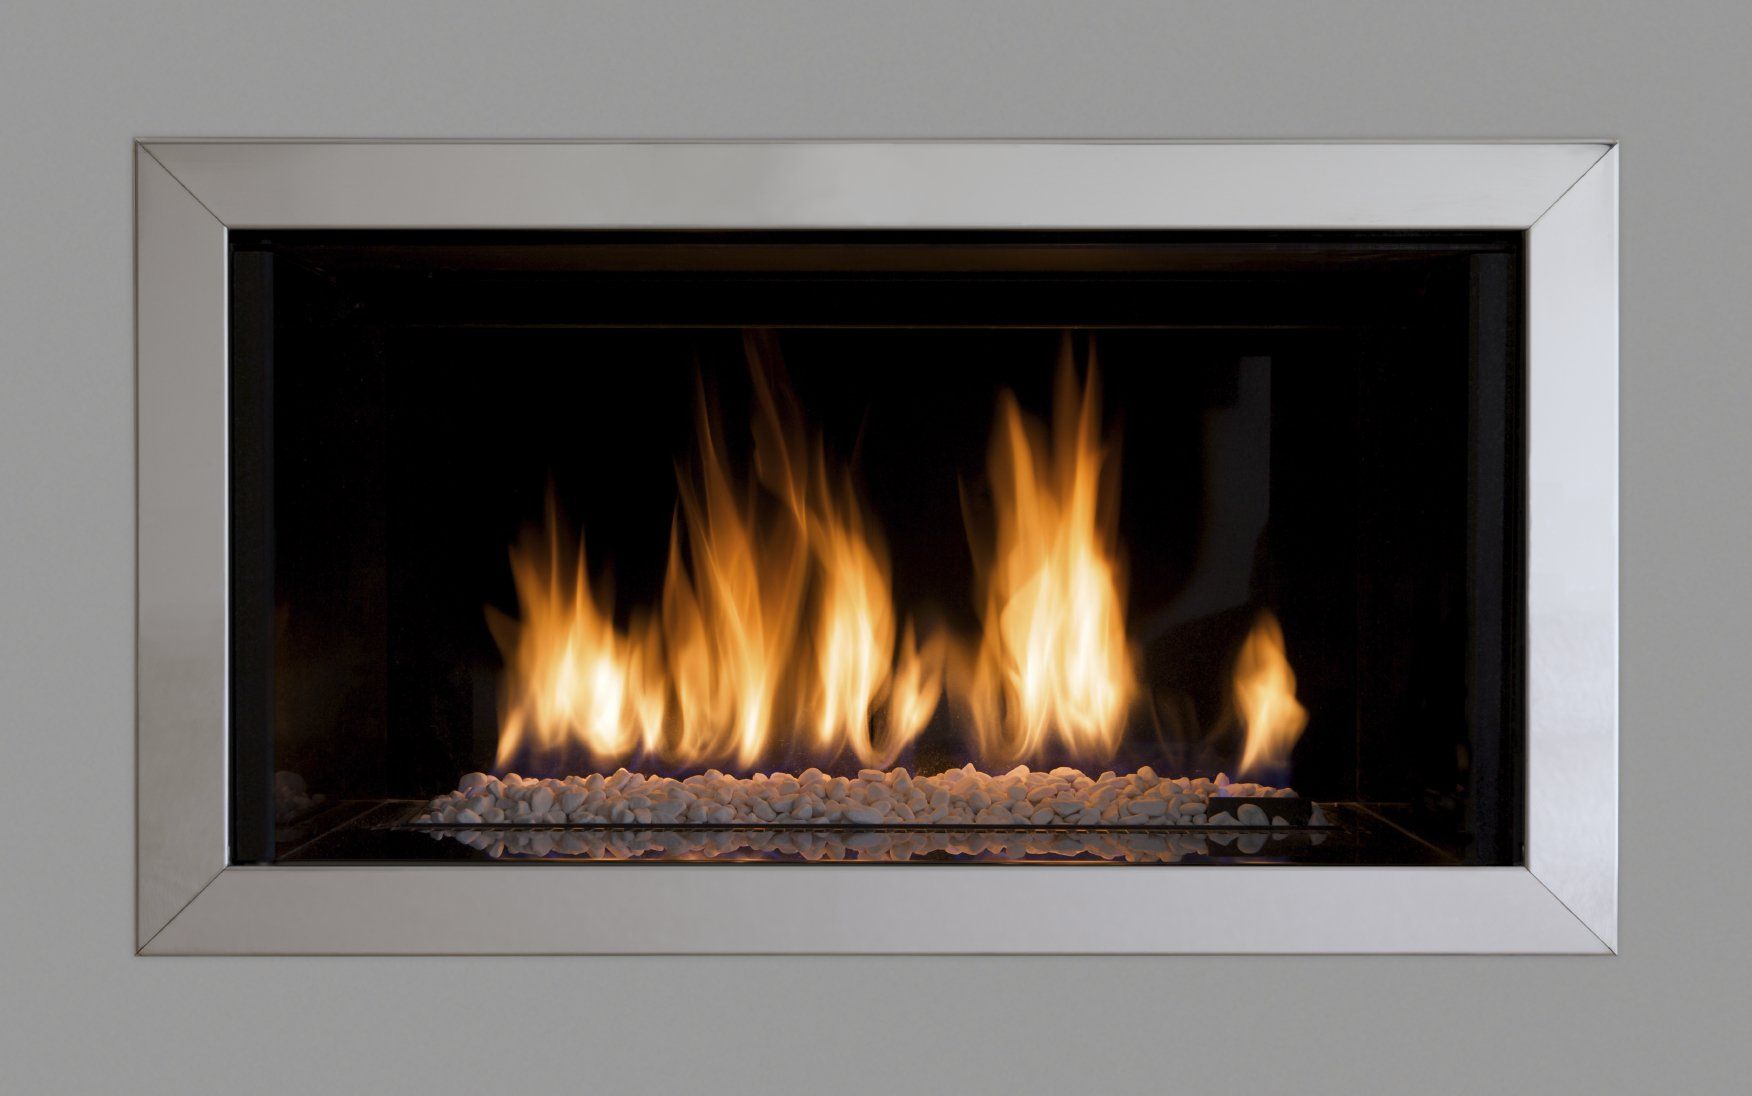 Fireplace insert with fire burning